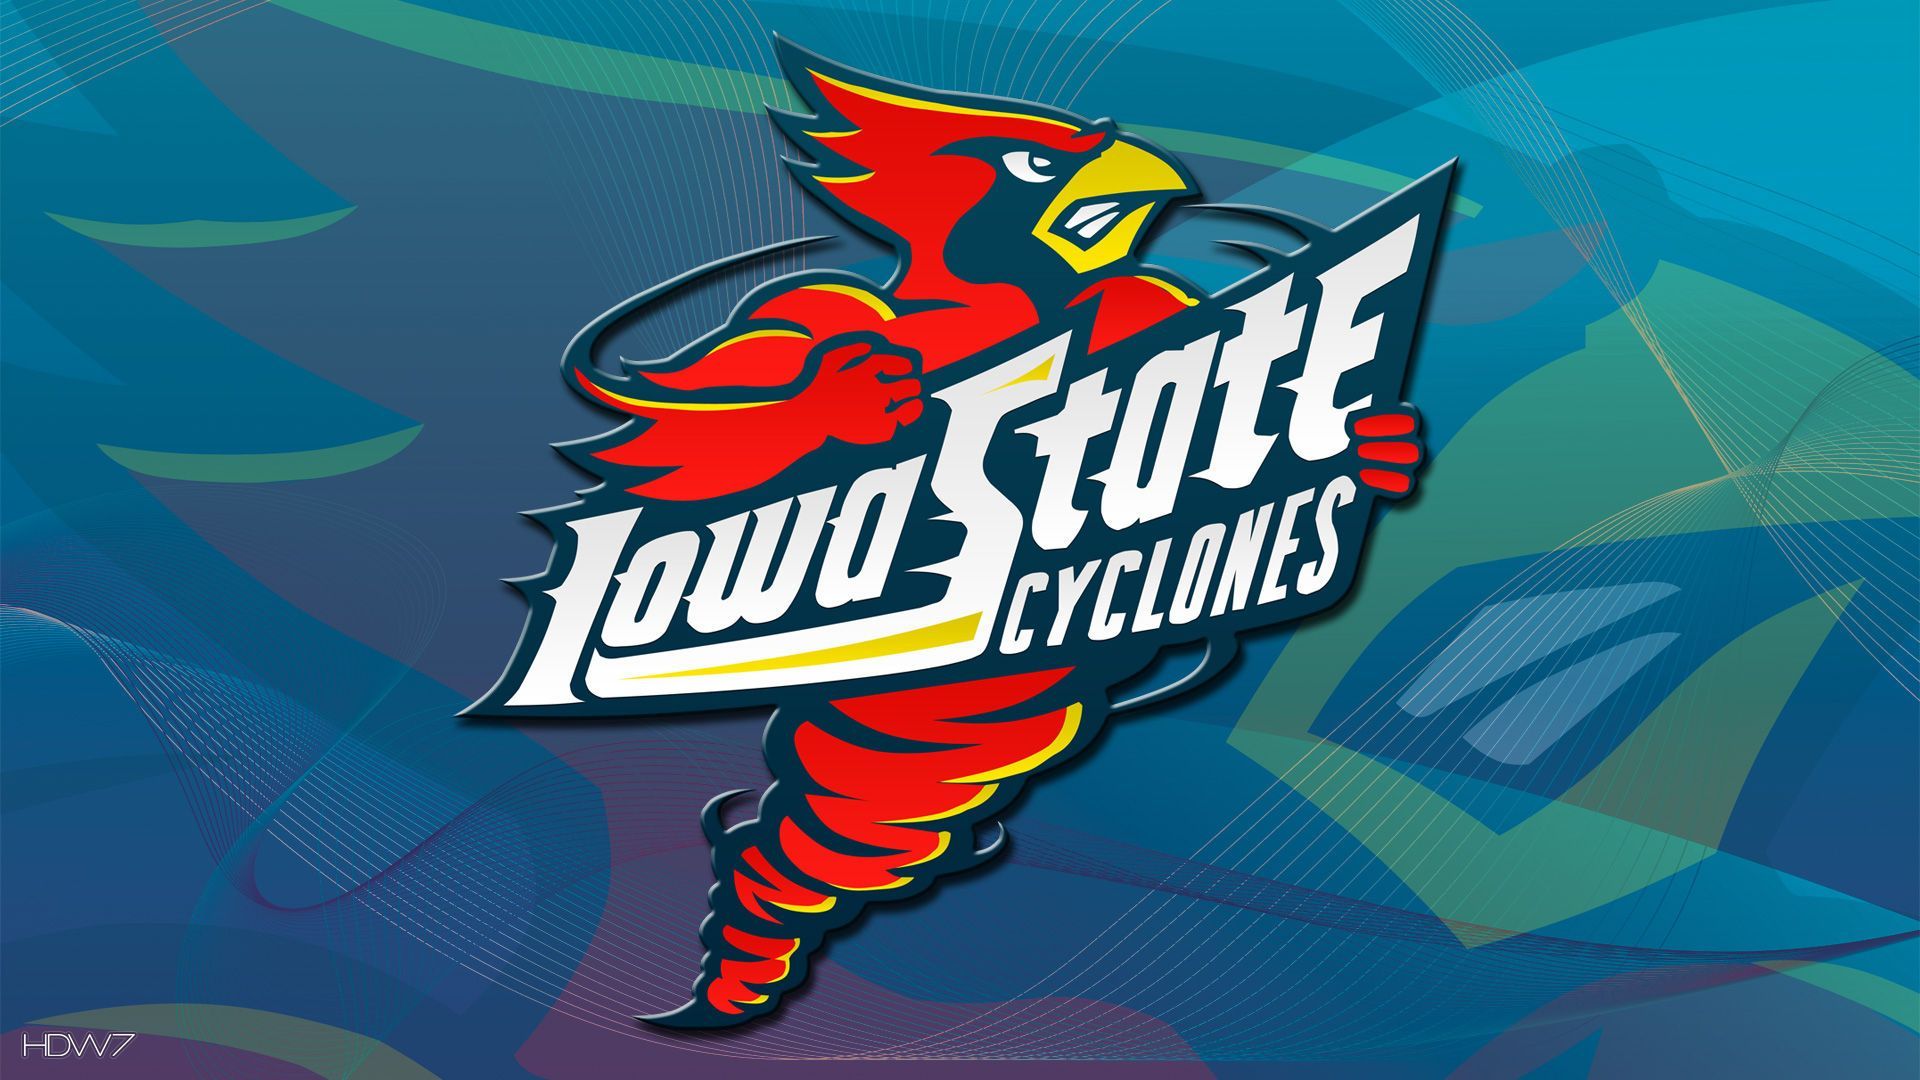 Iowa State Cyclones (1920×1080). Iowa State Cyclones, Iowa, Iowa State